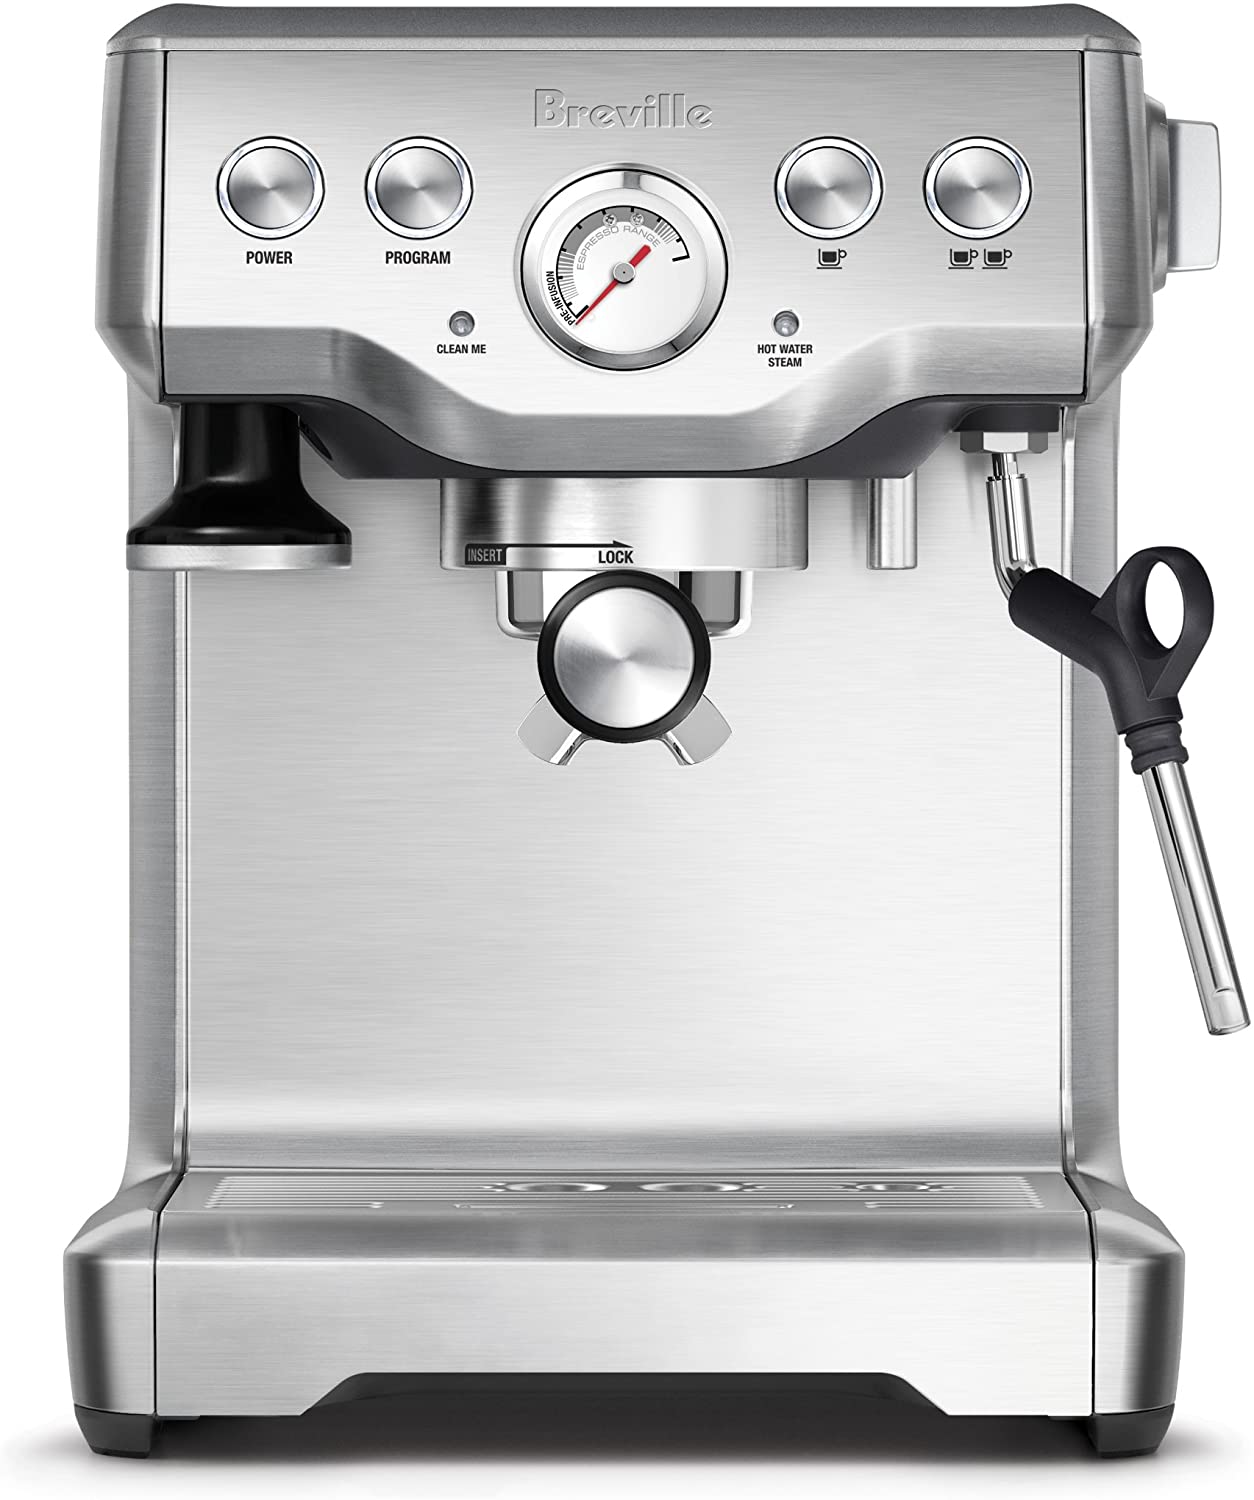 Breville BES840XL Infuser Espresso Machine, Brushed Stainless Steel - Amazon $399.95